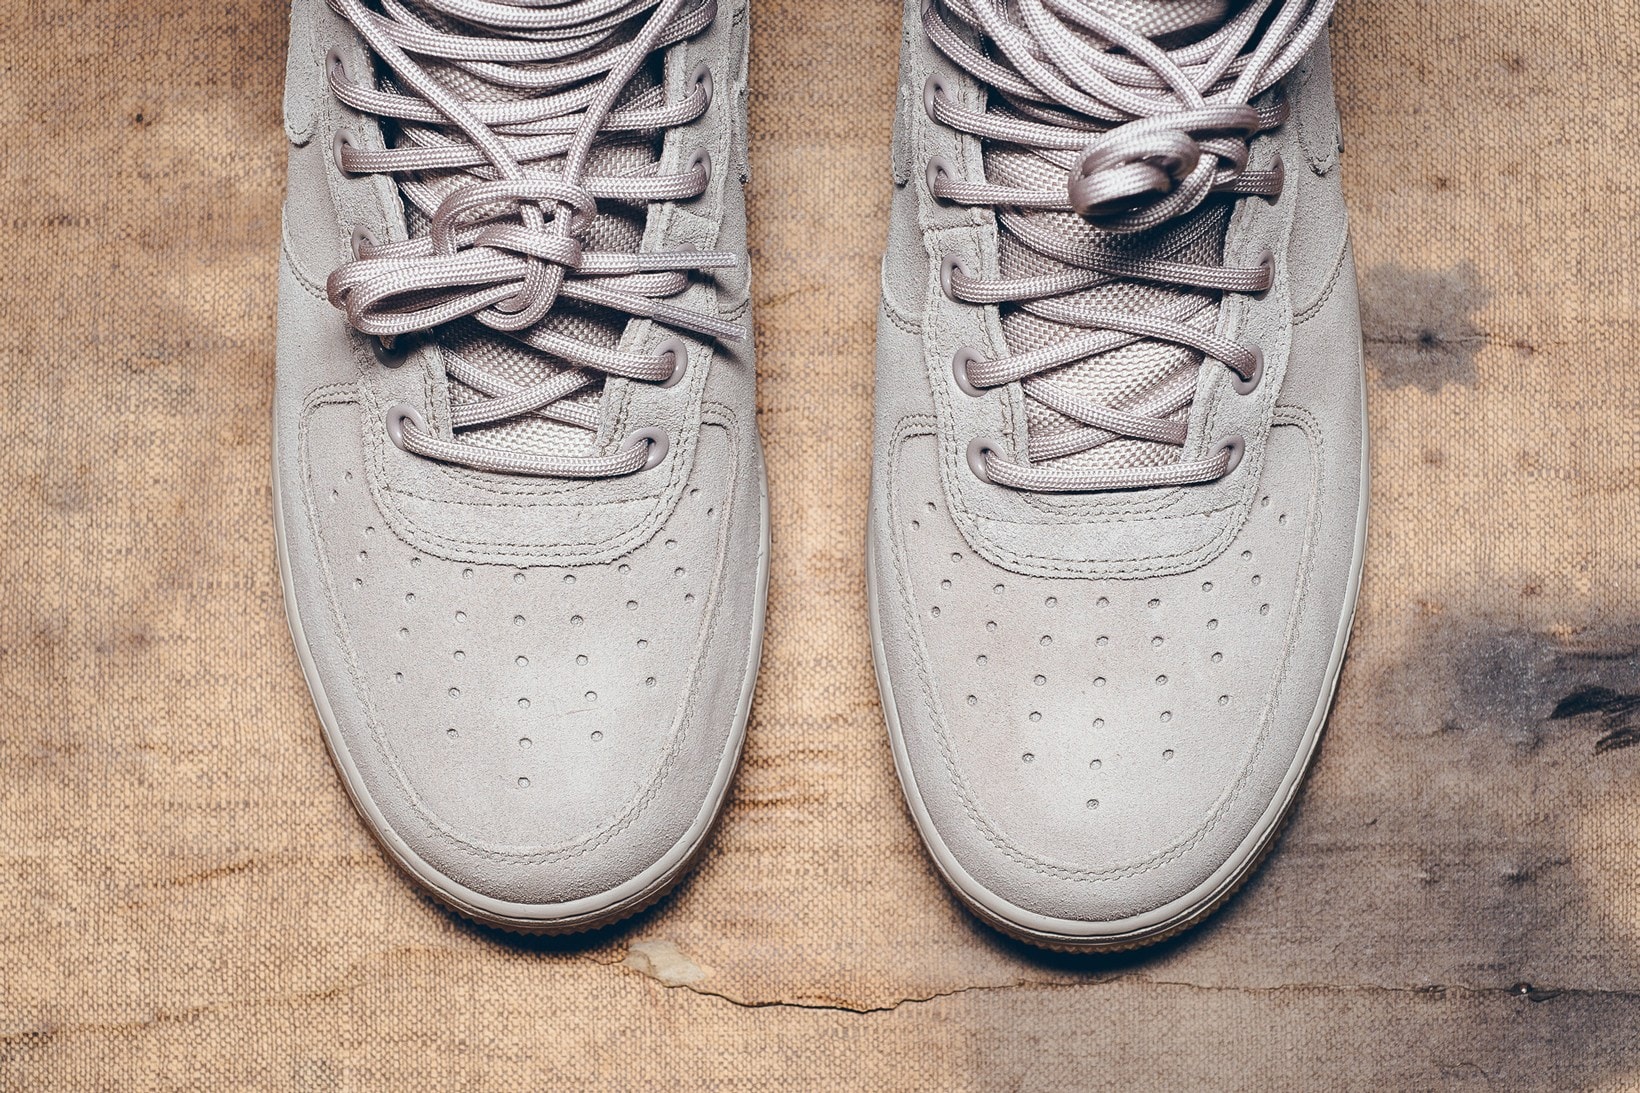 Nike Special Field Air Force 1 "String" Closer Look